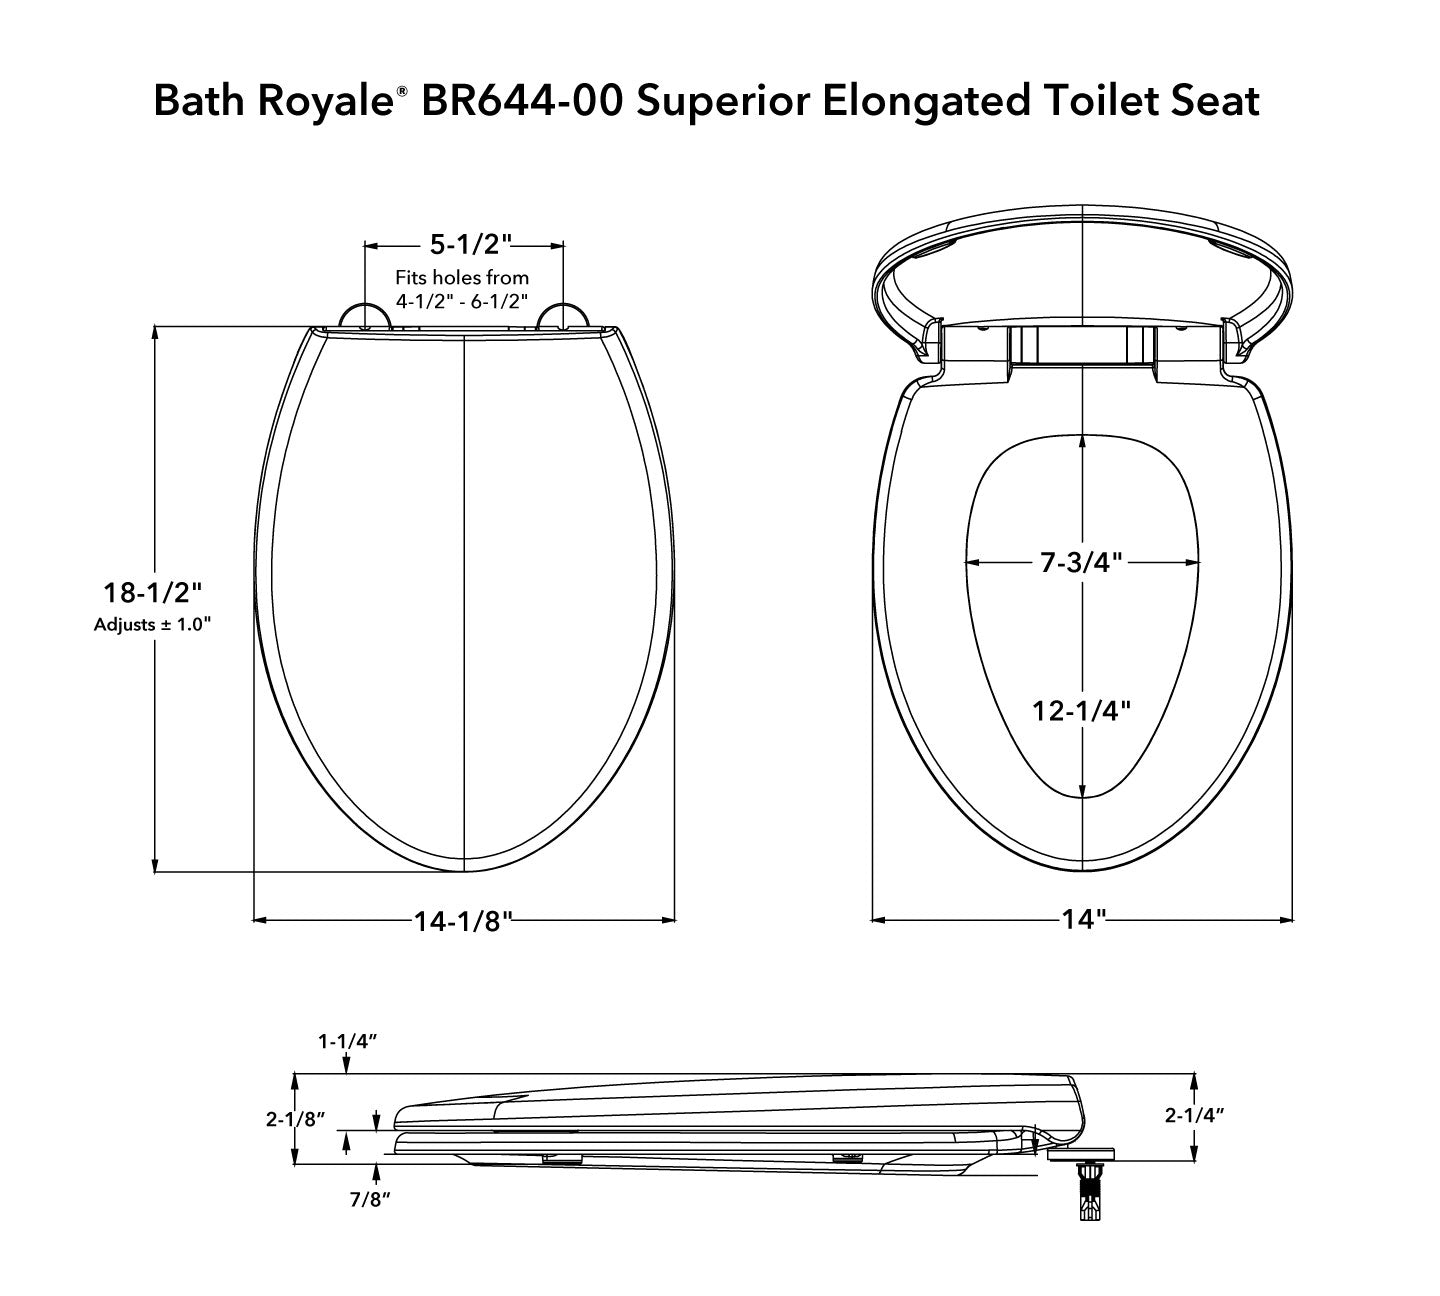 BR644 Superior Elongated Toilet Seat Dimensions